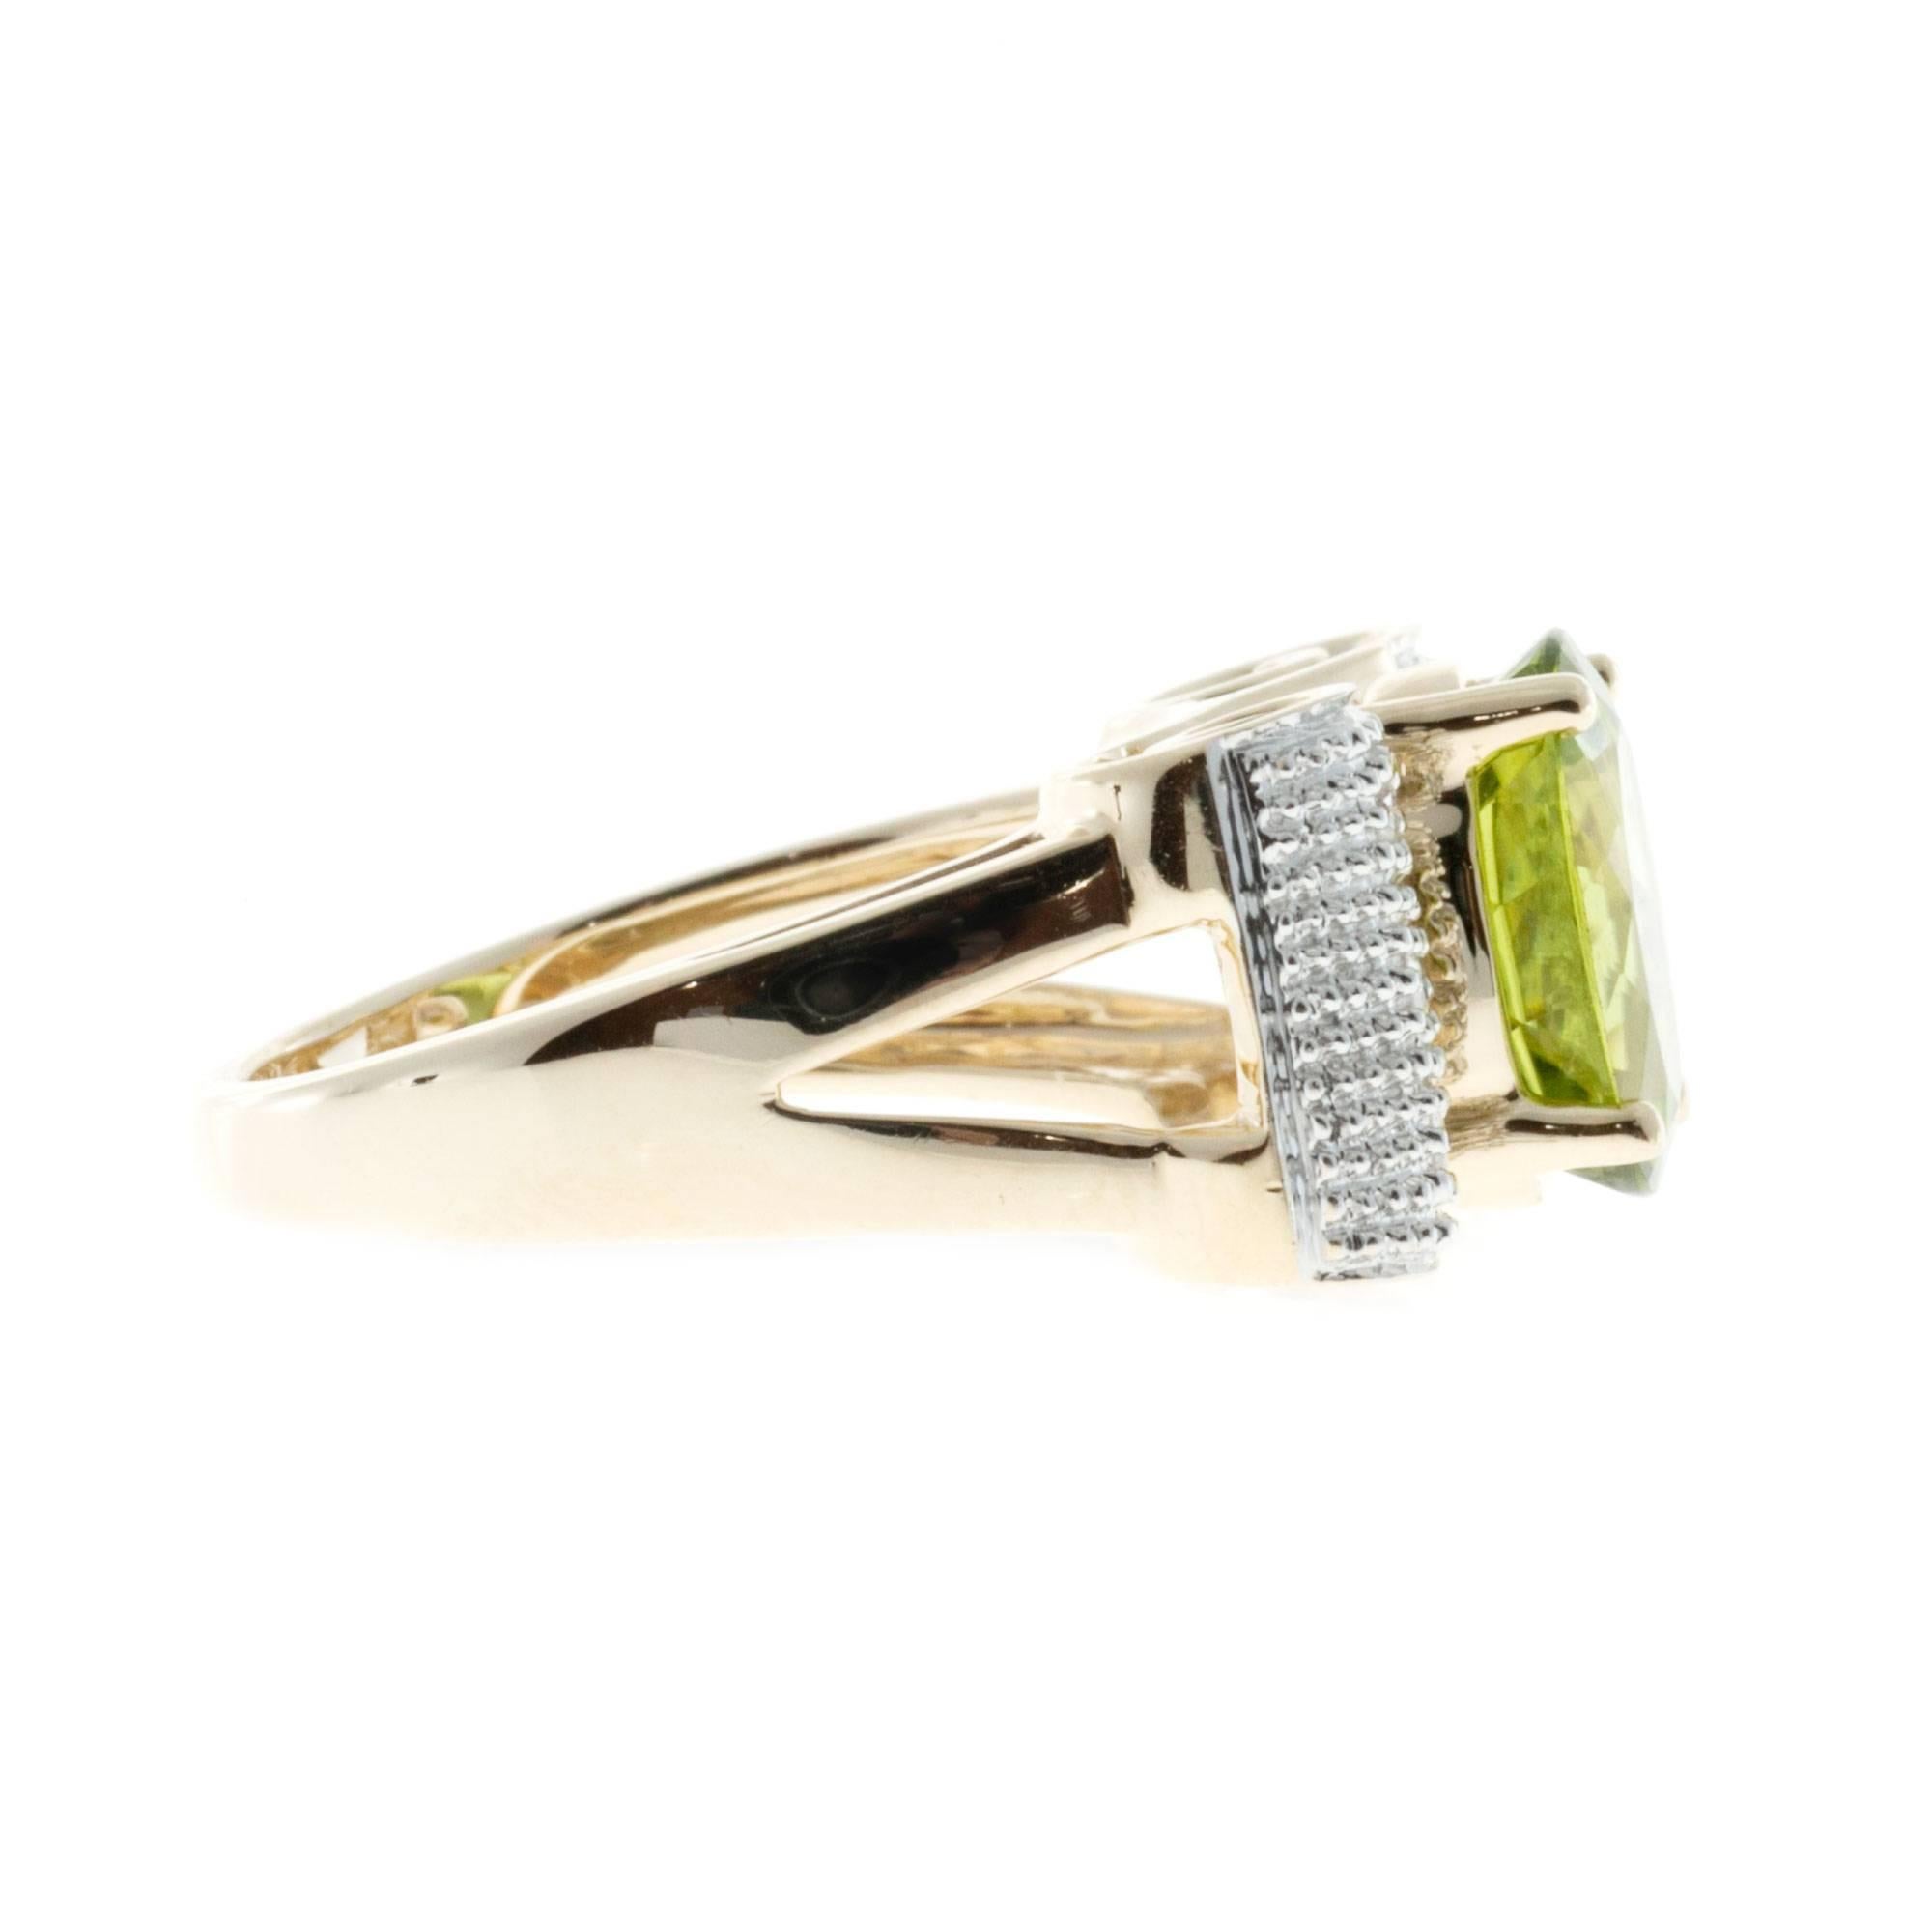 Asymmetrical swirl design ring in 14k yellow gold with diamonds set in white gold and a bright medium green Peridot.

1 oval green Peridot, approx. total weight .30cts, VS, 10.87 x 8.83mm
10 round diamonds, approx. total weight .10cts, H, SI
Size 8